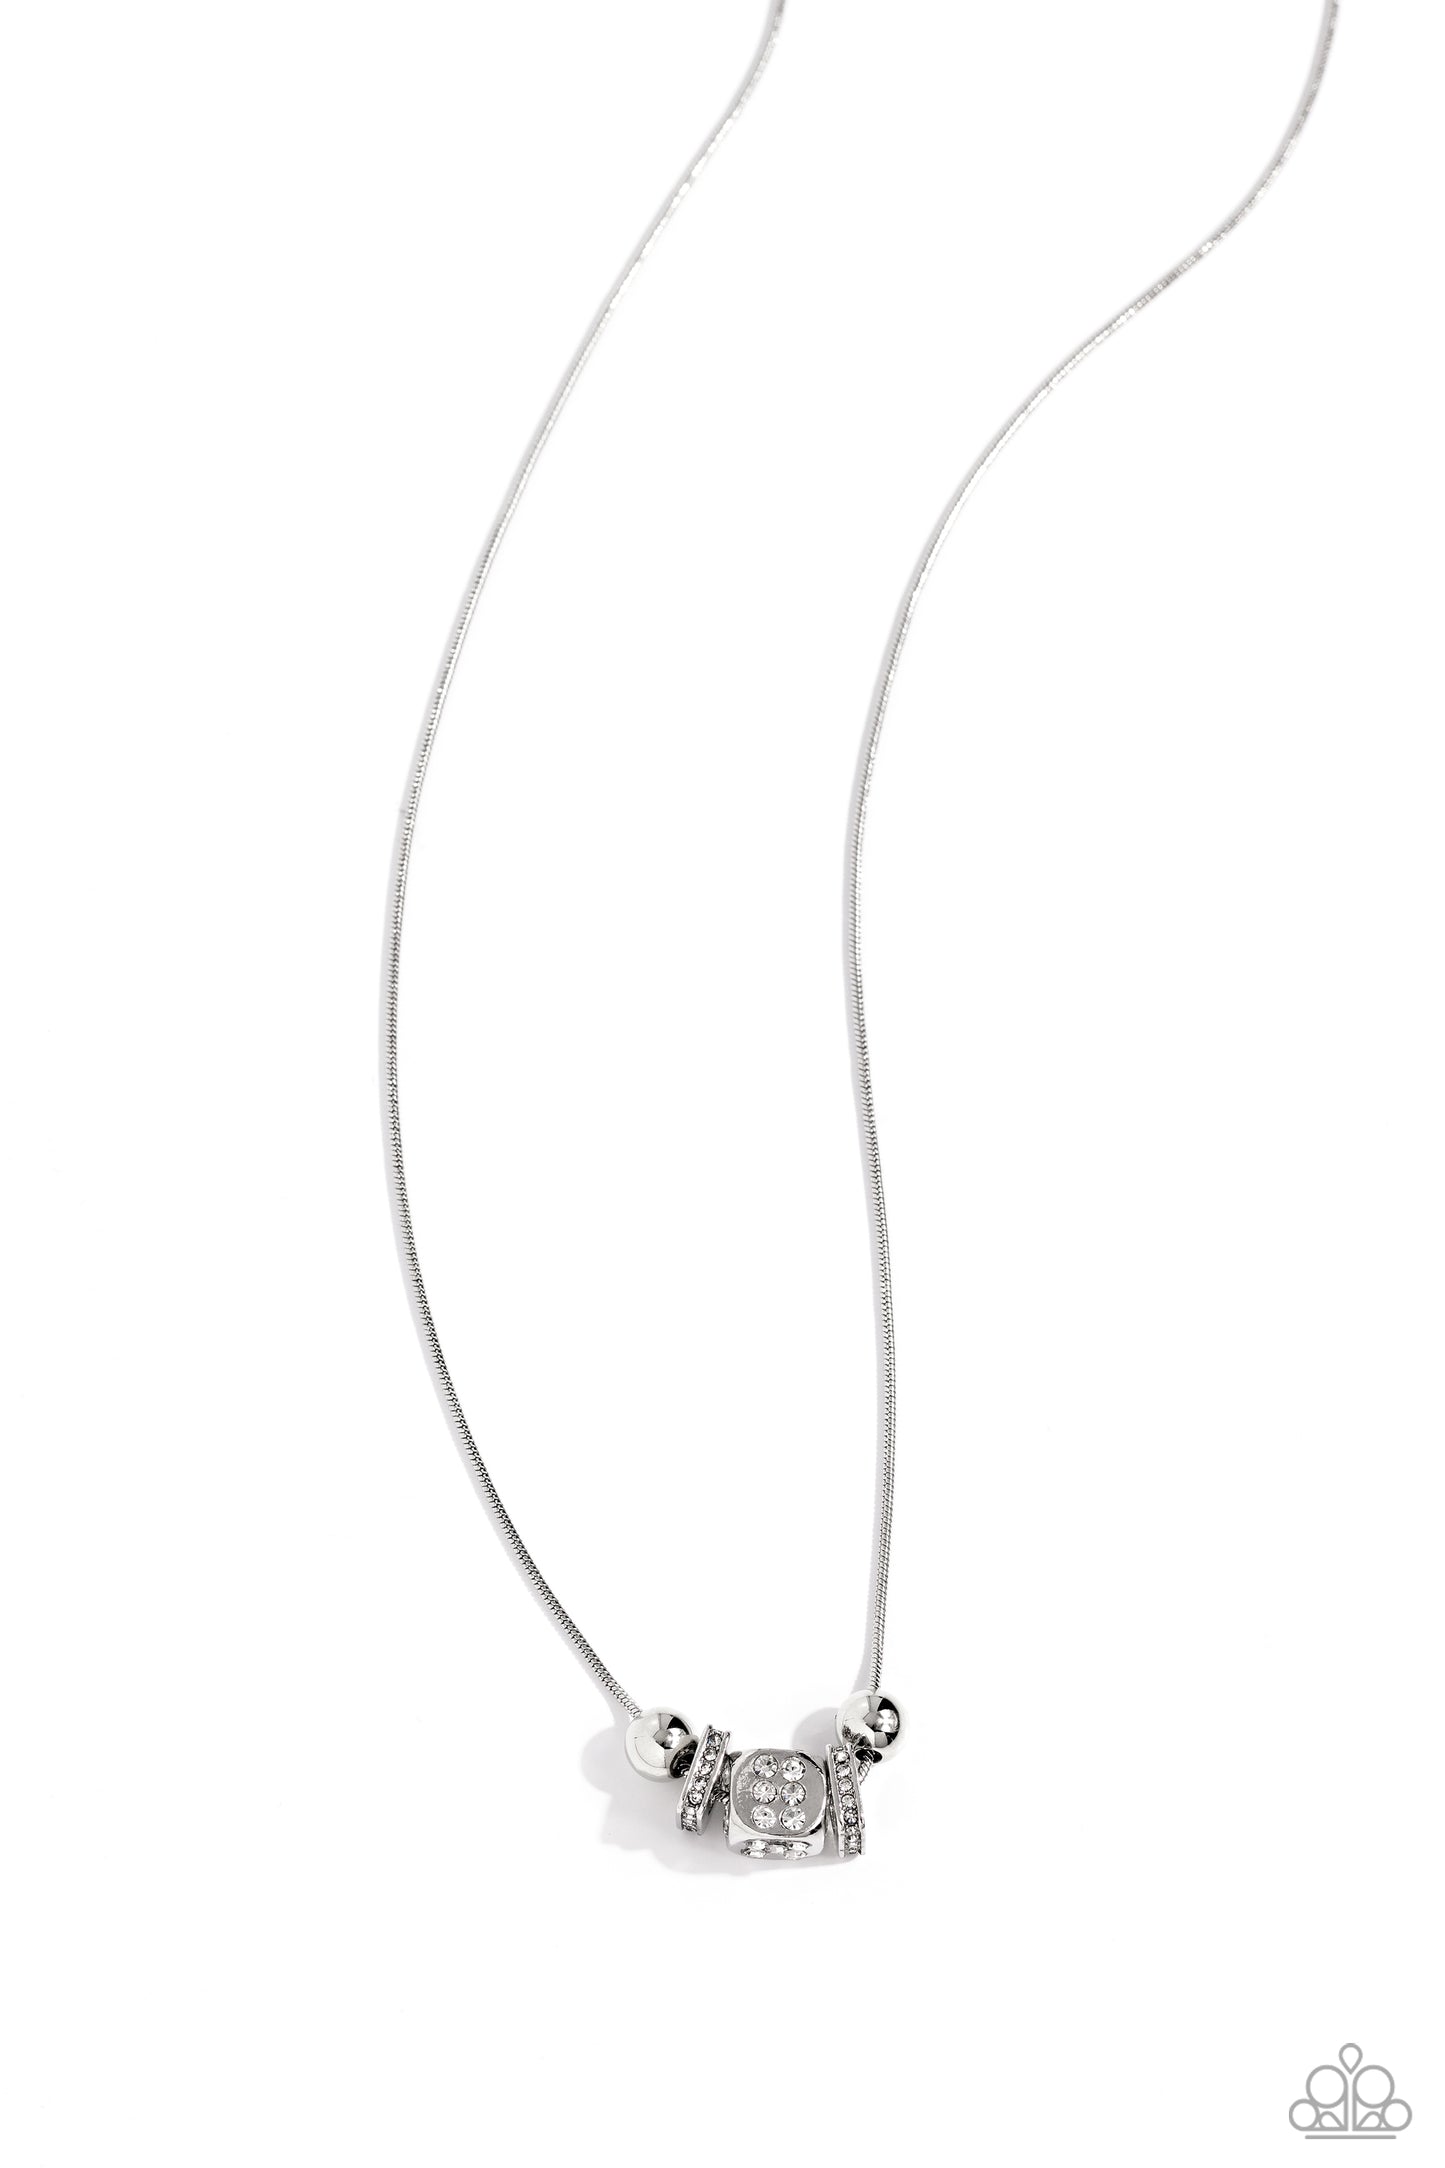 Rolling the Dice - white - Paparazzi necklace